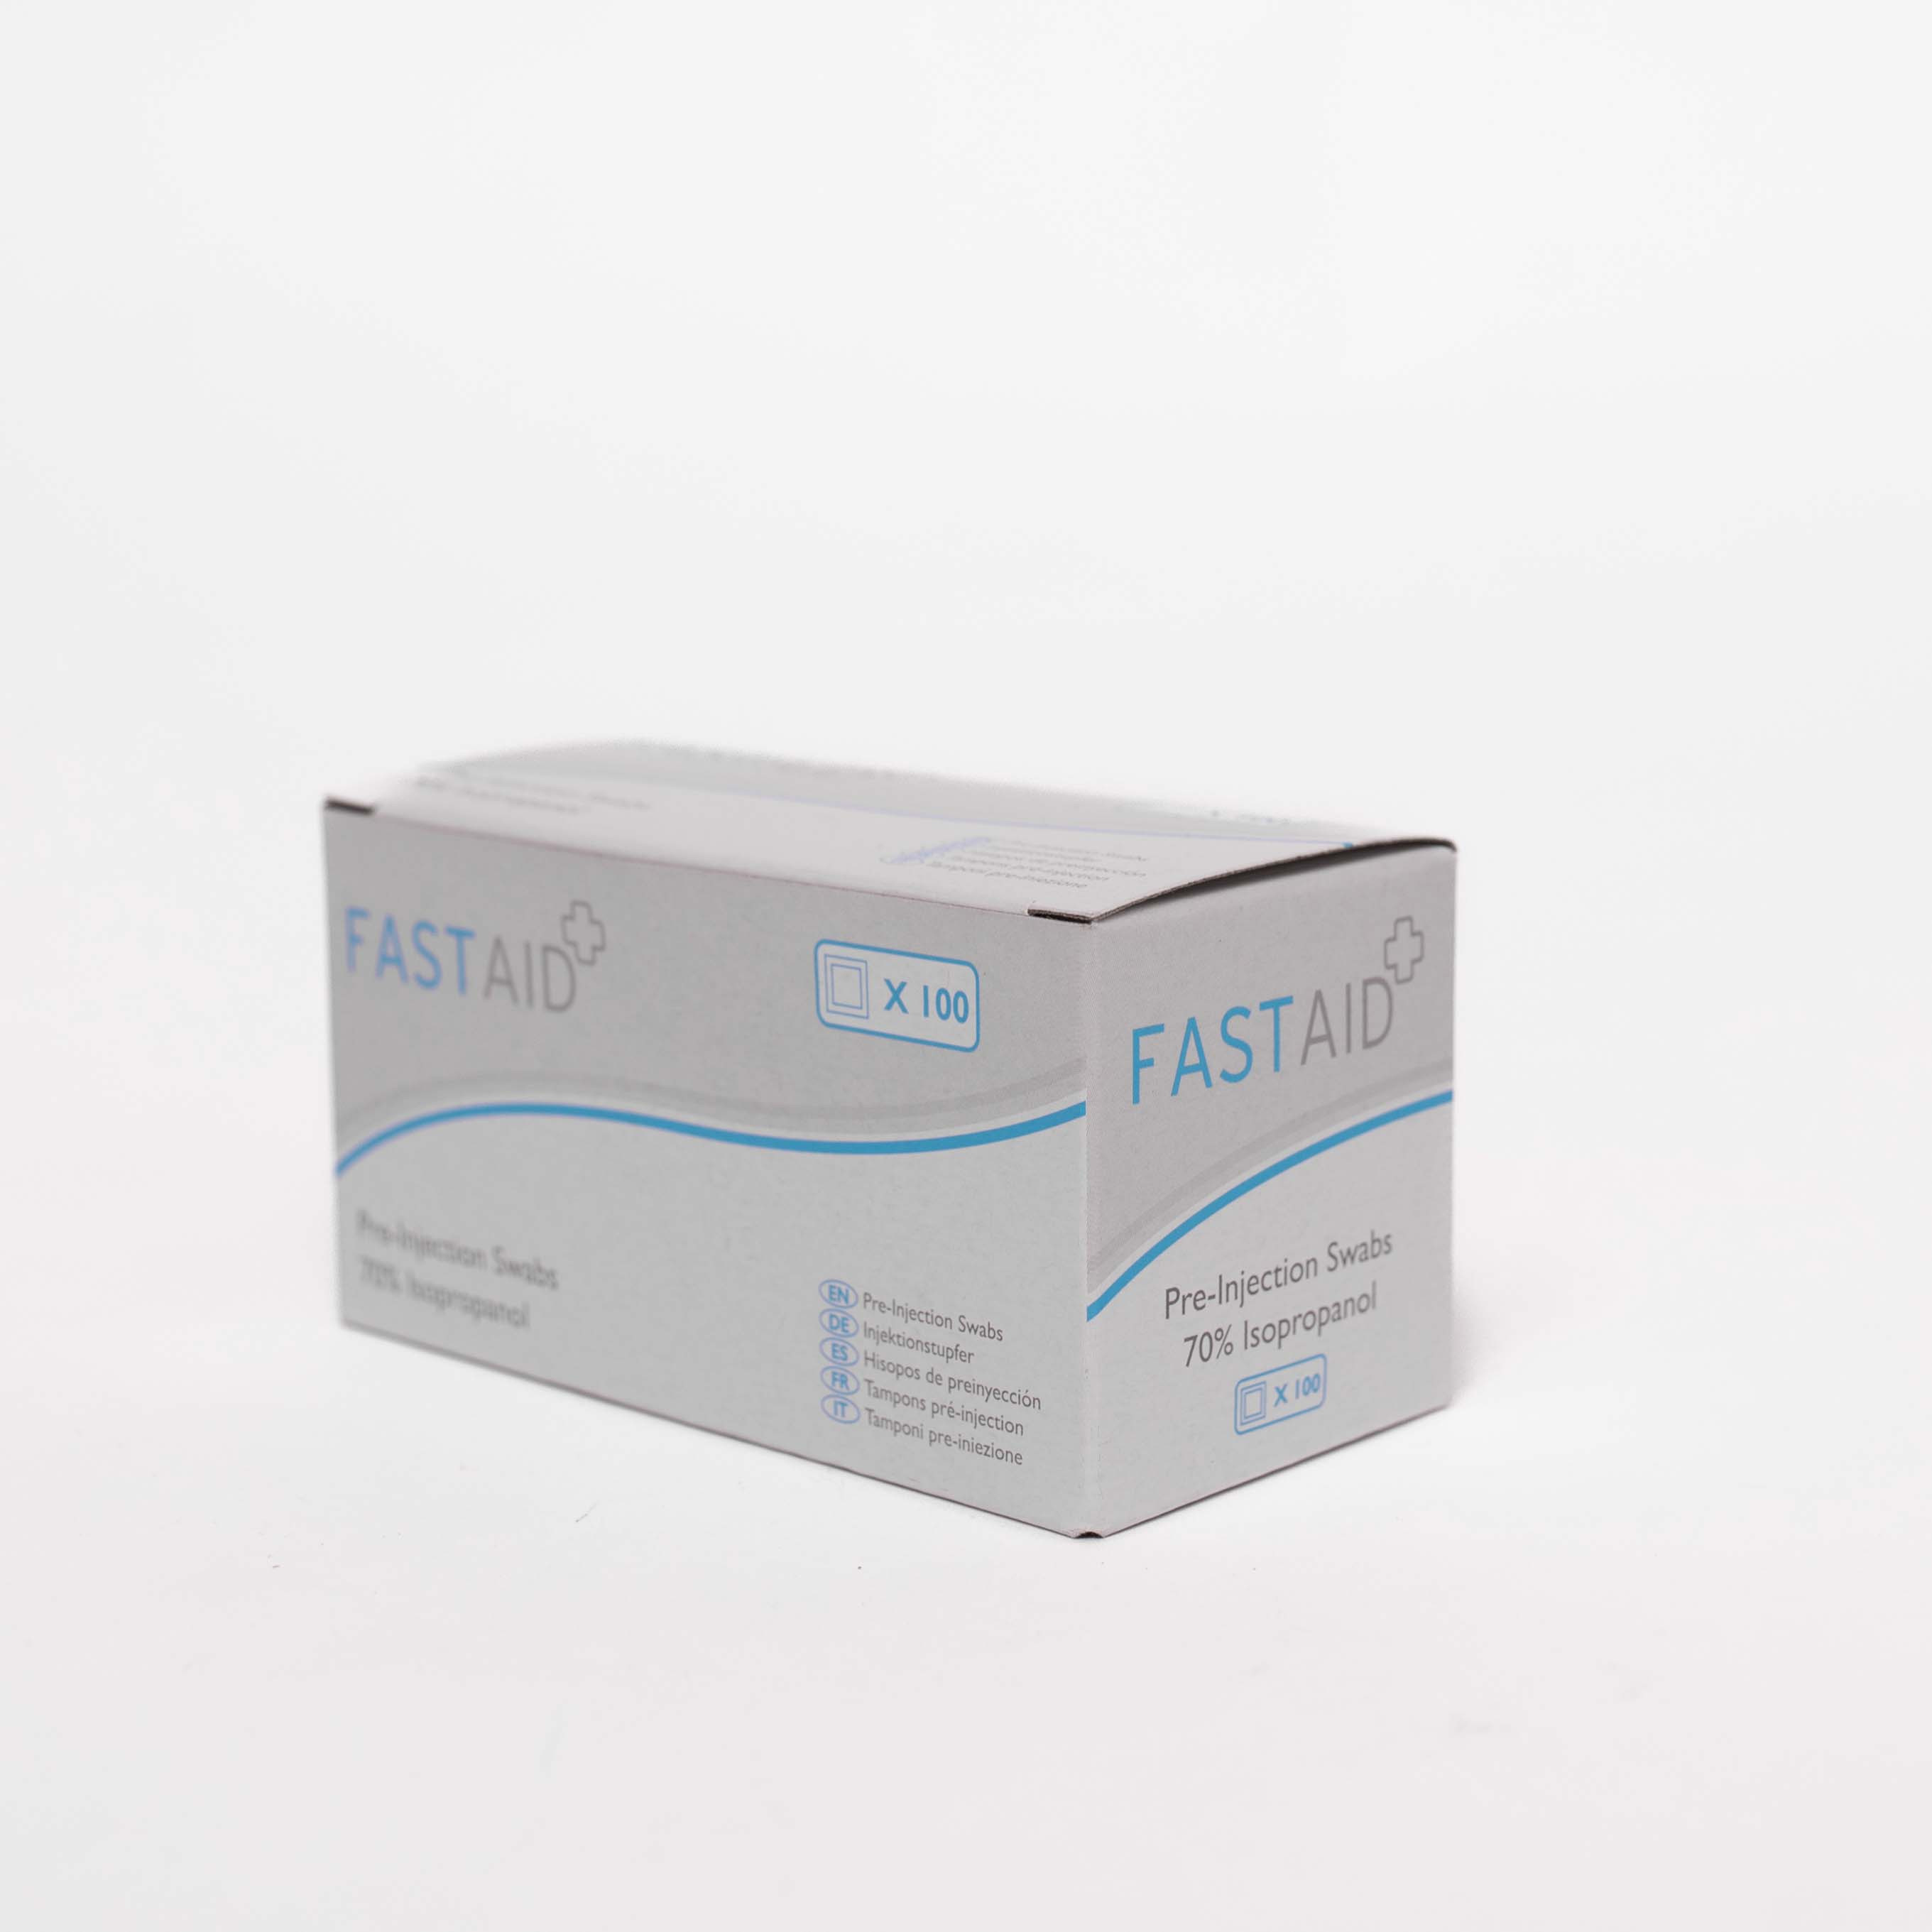 Fast aid pre injection swabs